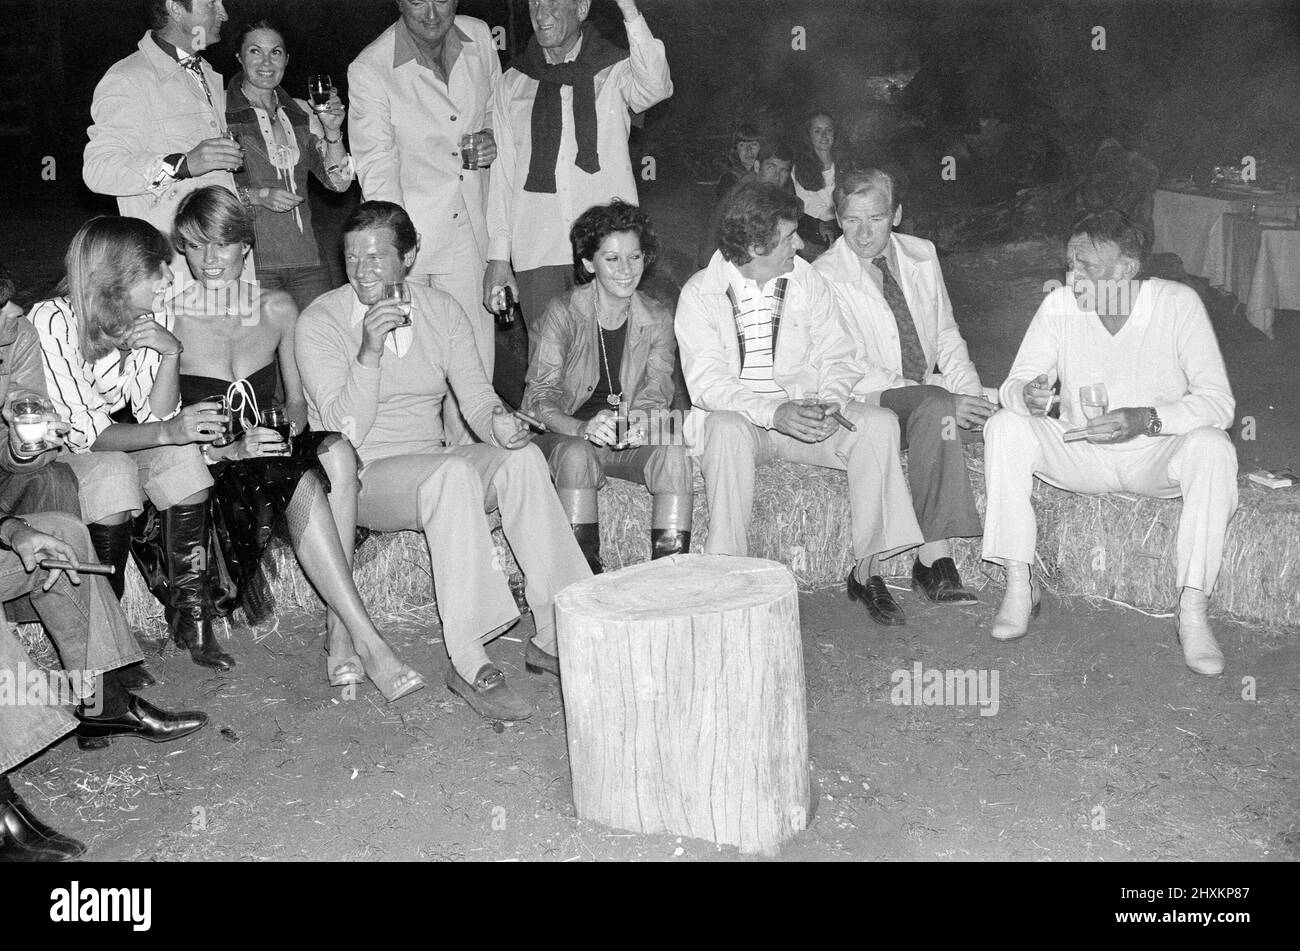 Roger Moore's 50th Birthday Party in the bush near Tshipise, South Africa, during the filming of his latest film 'Wild Geese.' Suzy Miller, Roger Moore, Luisa Mattioli, Richard Burton and other party guests. 18th October 1977. Stock Photo